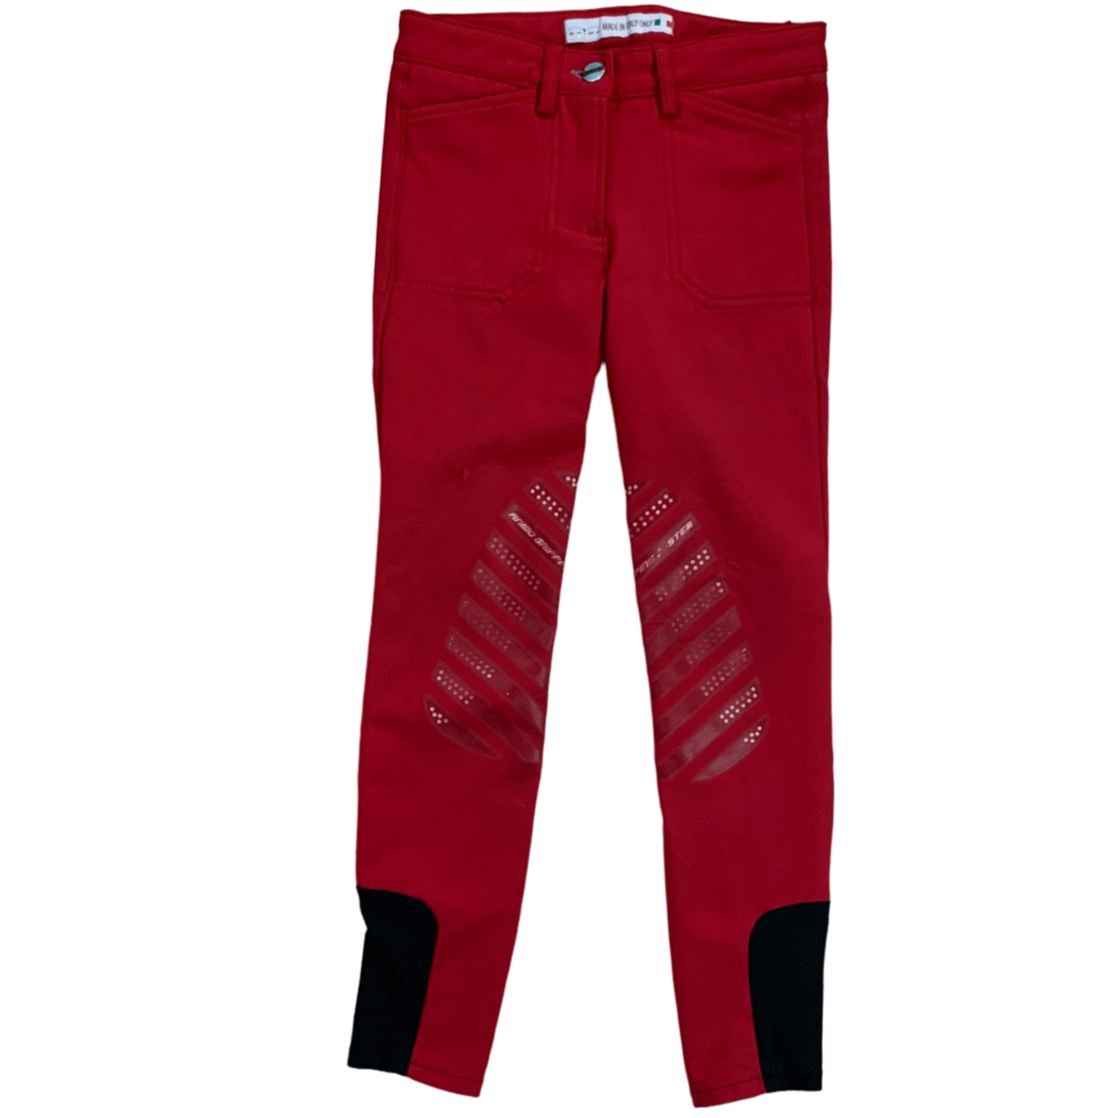 Animo Pony Division Breeches in Red - Youth 8